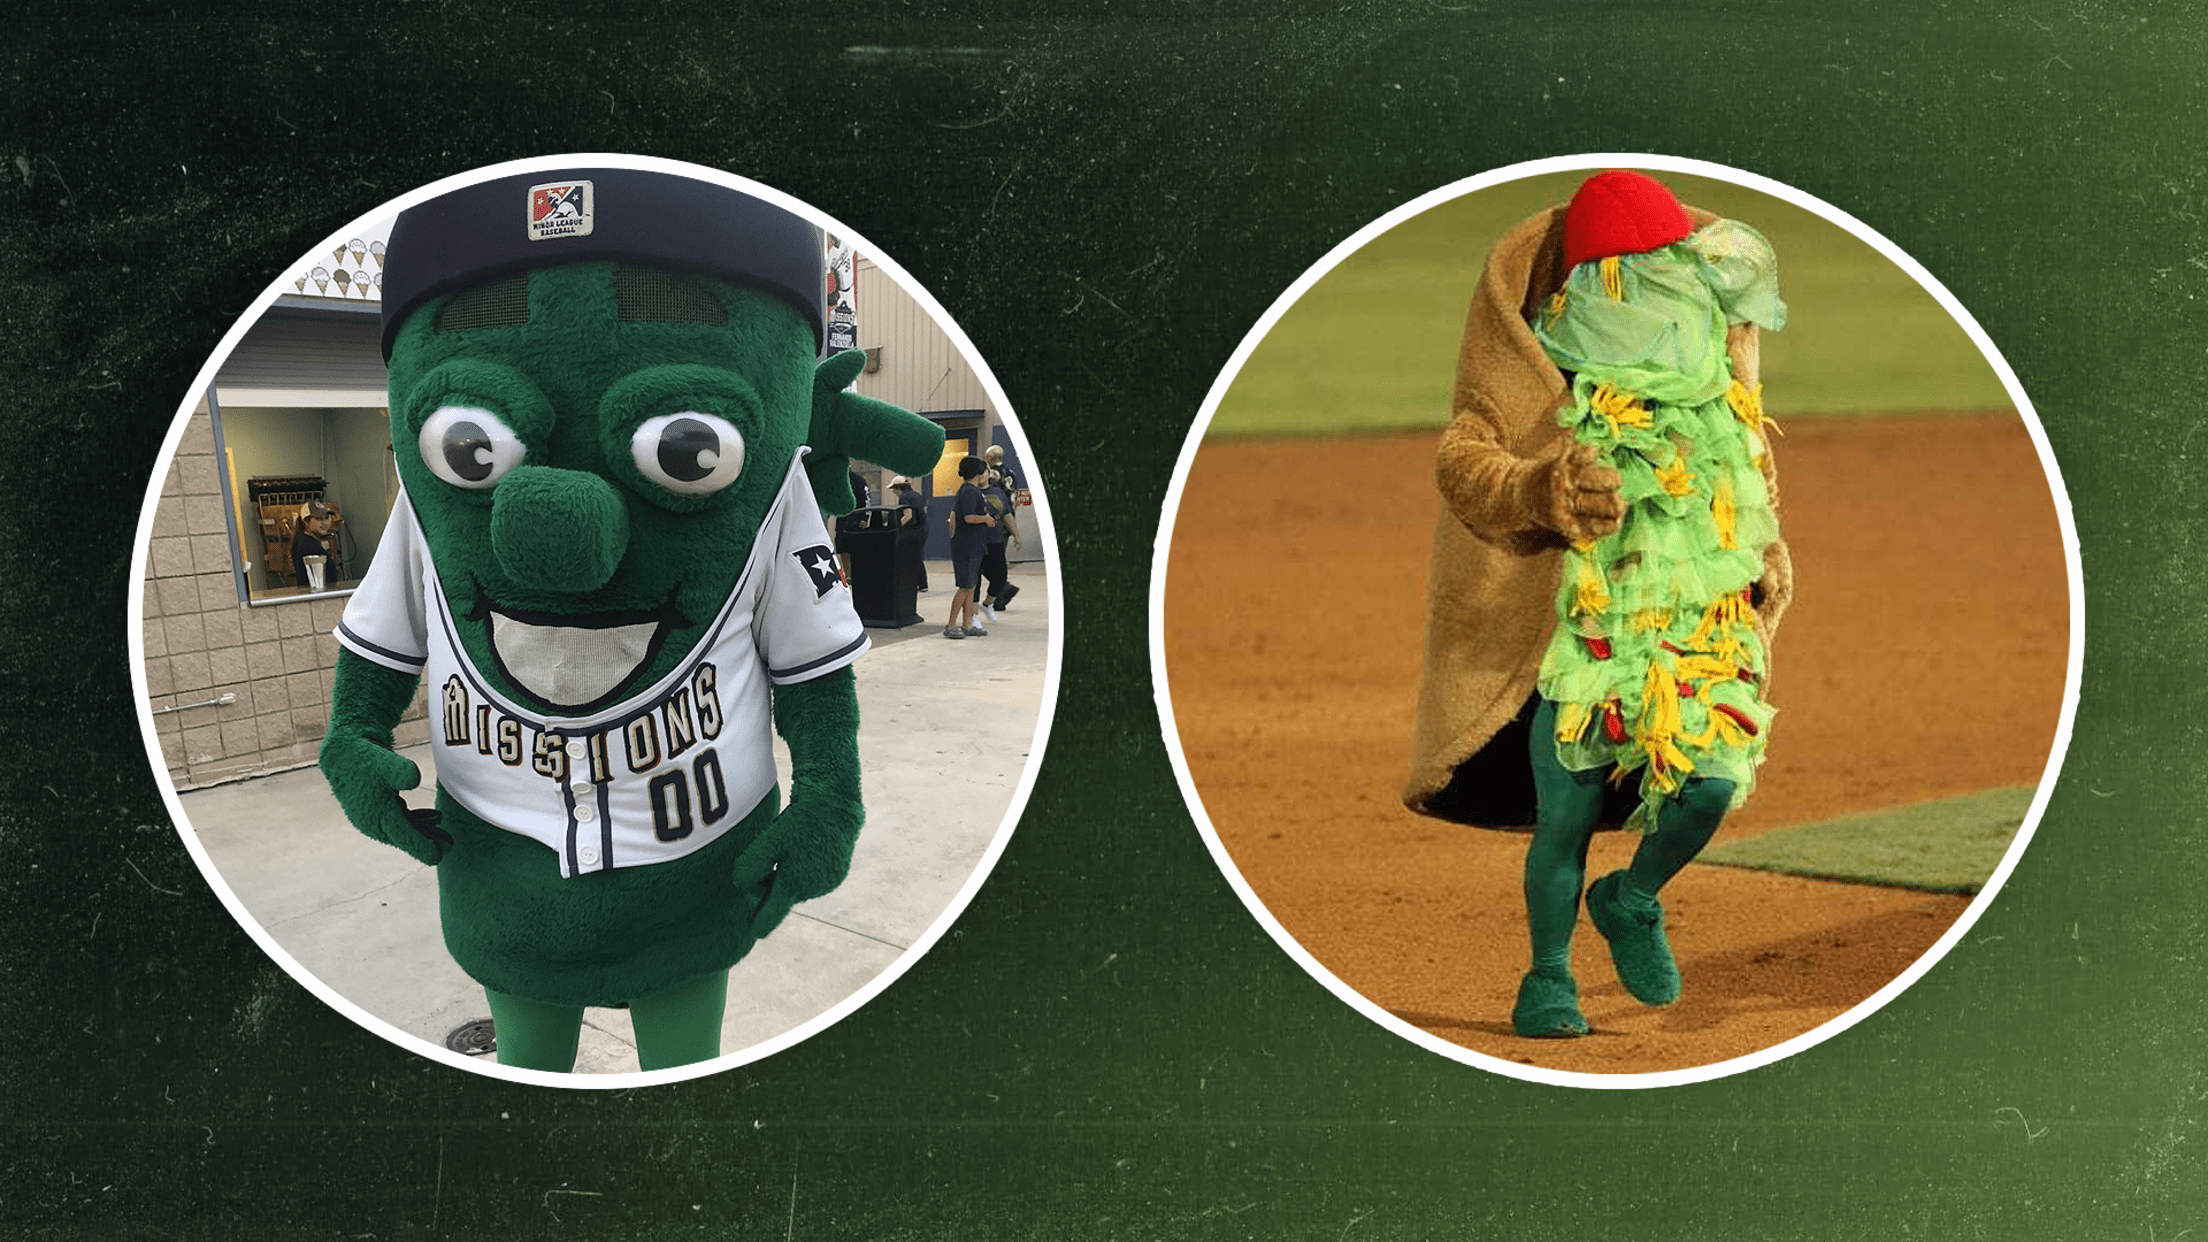 Triple-A El Paso's mascot is possibly a menace to society